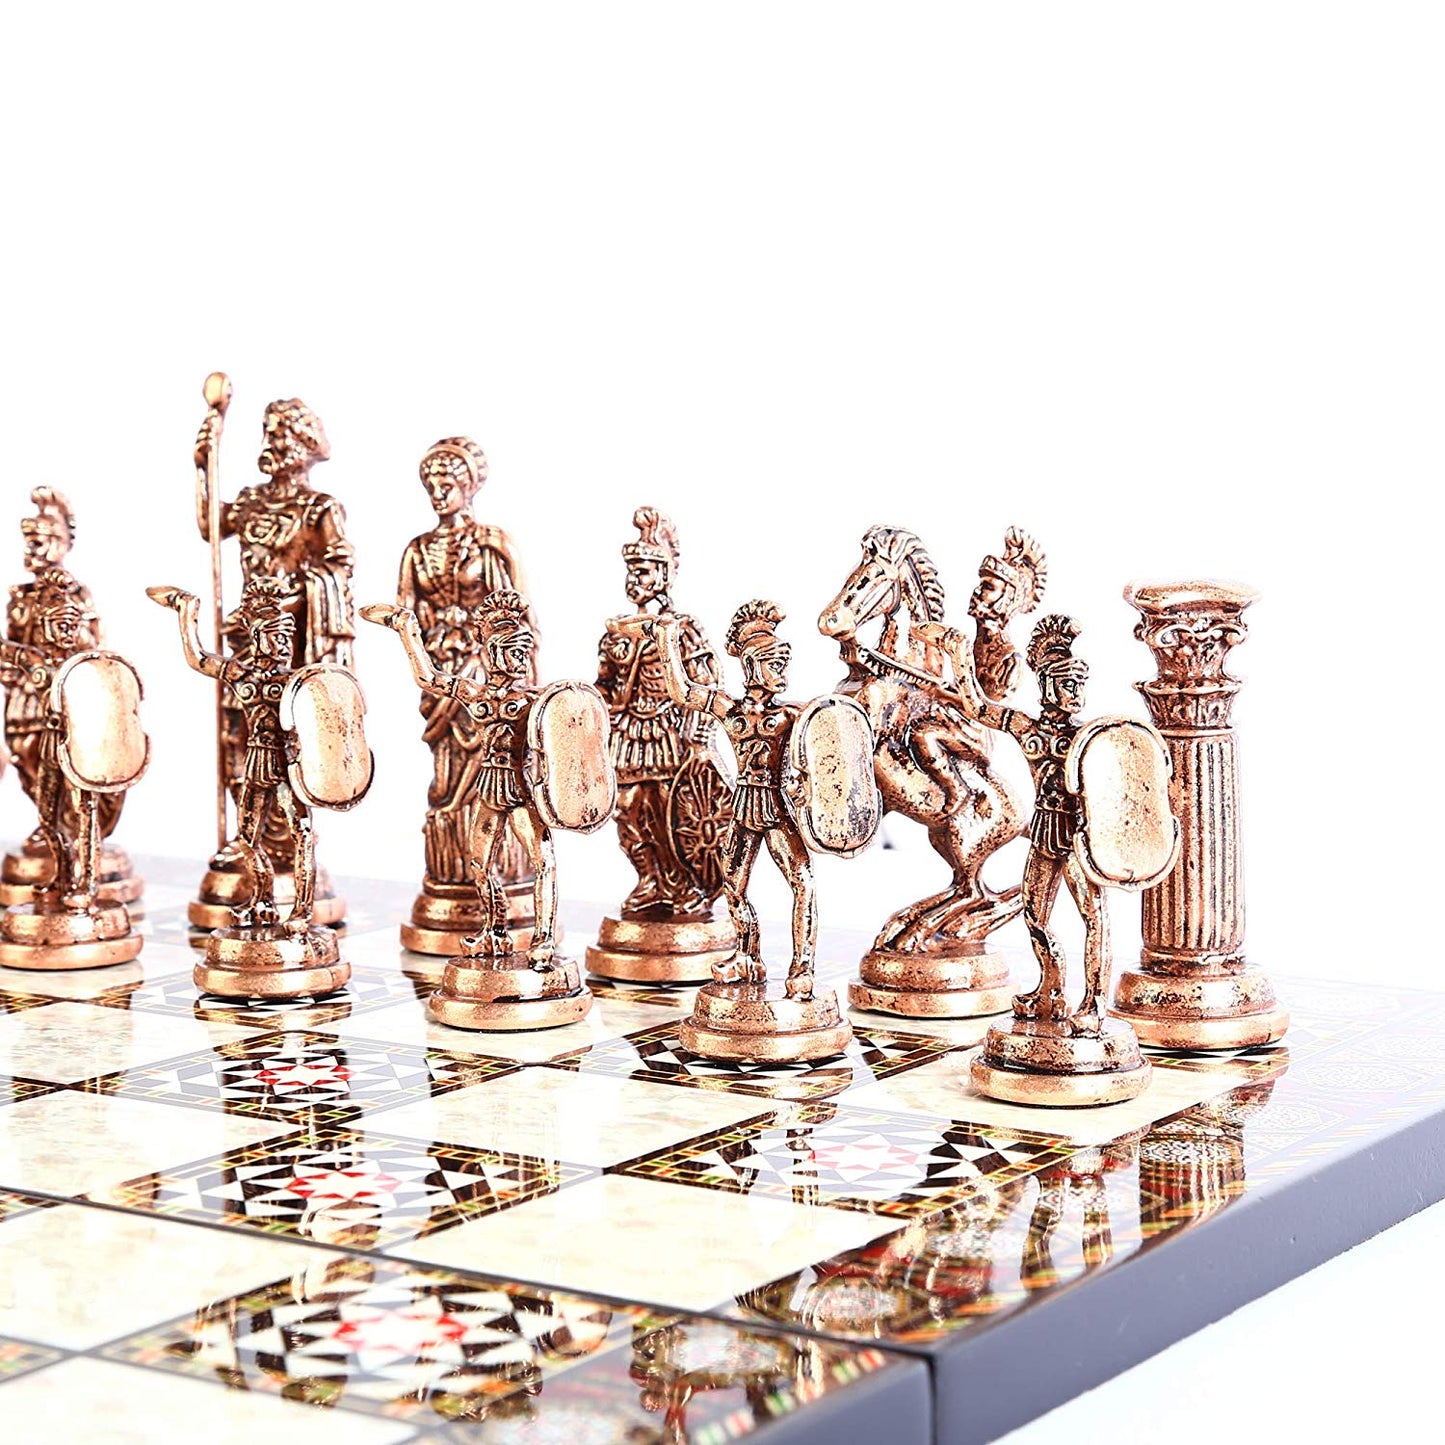 Antique Copper Rome Figures Chess Set Sculptures and Statues